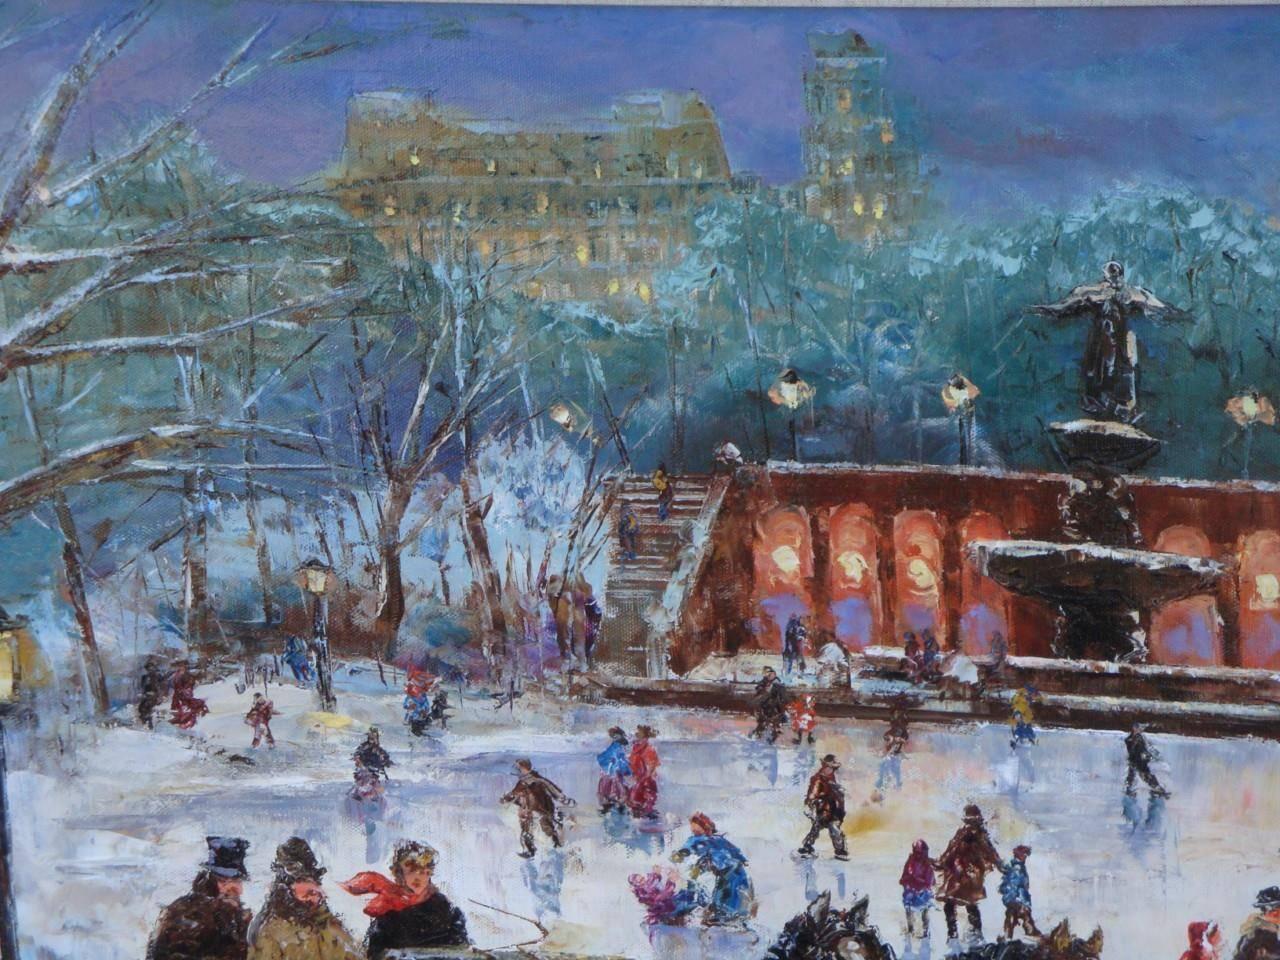 A beautiful rare deluxe original painting by Robert Lebron (1928-2013) of old New York city ice skating by central park showcasing the plaza hotel. Marvellously done with outstanding and amazing intricate detail work! Signed on lower bottom and